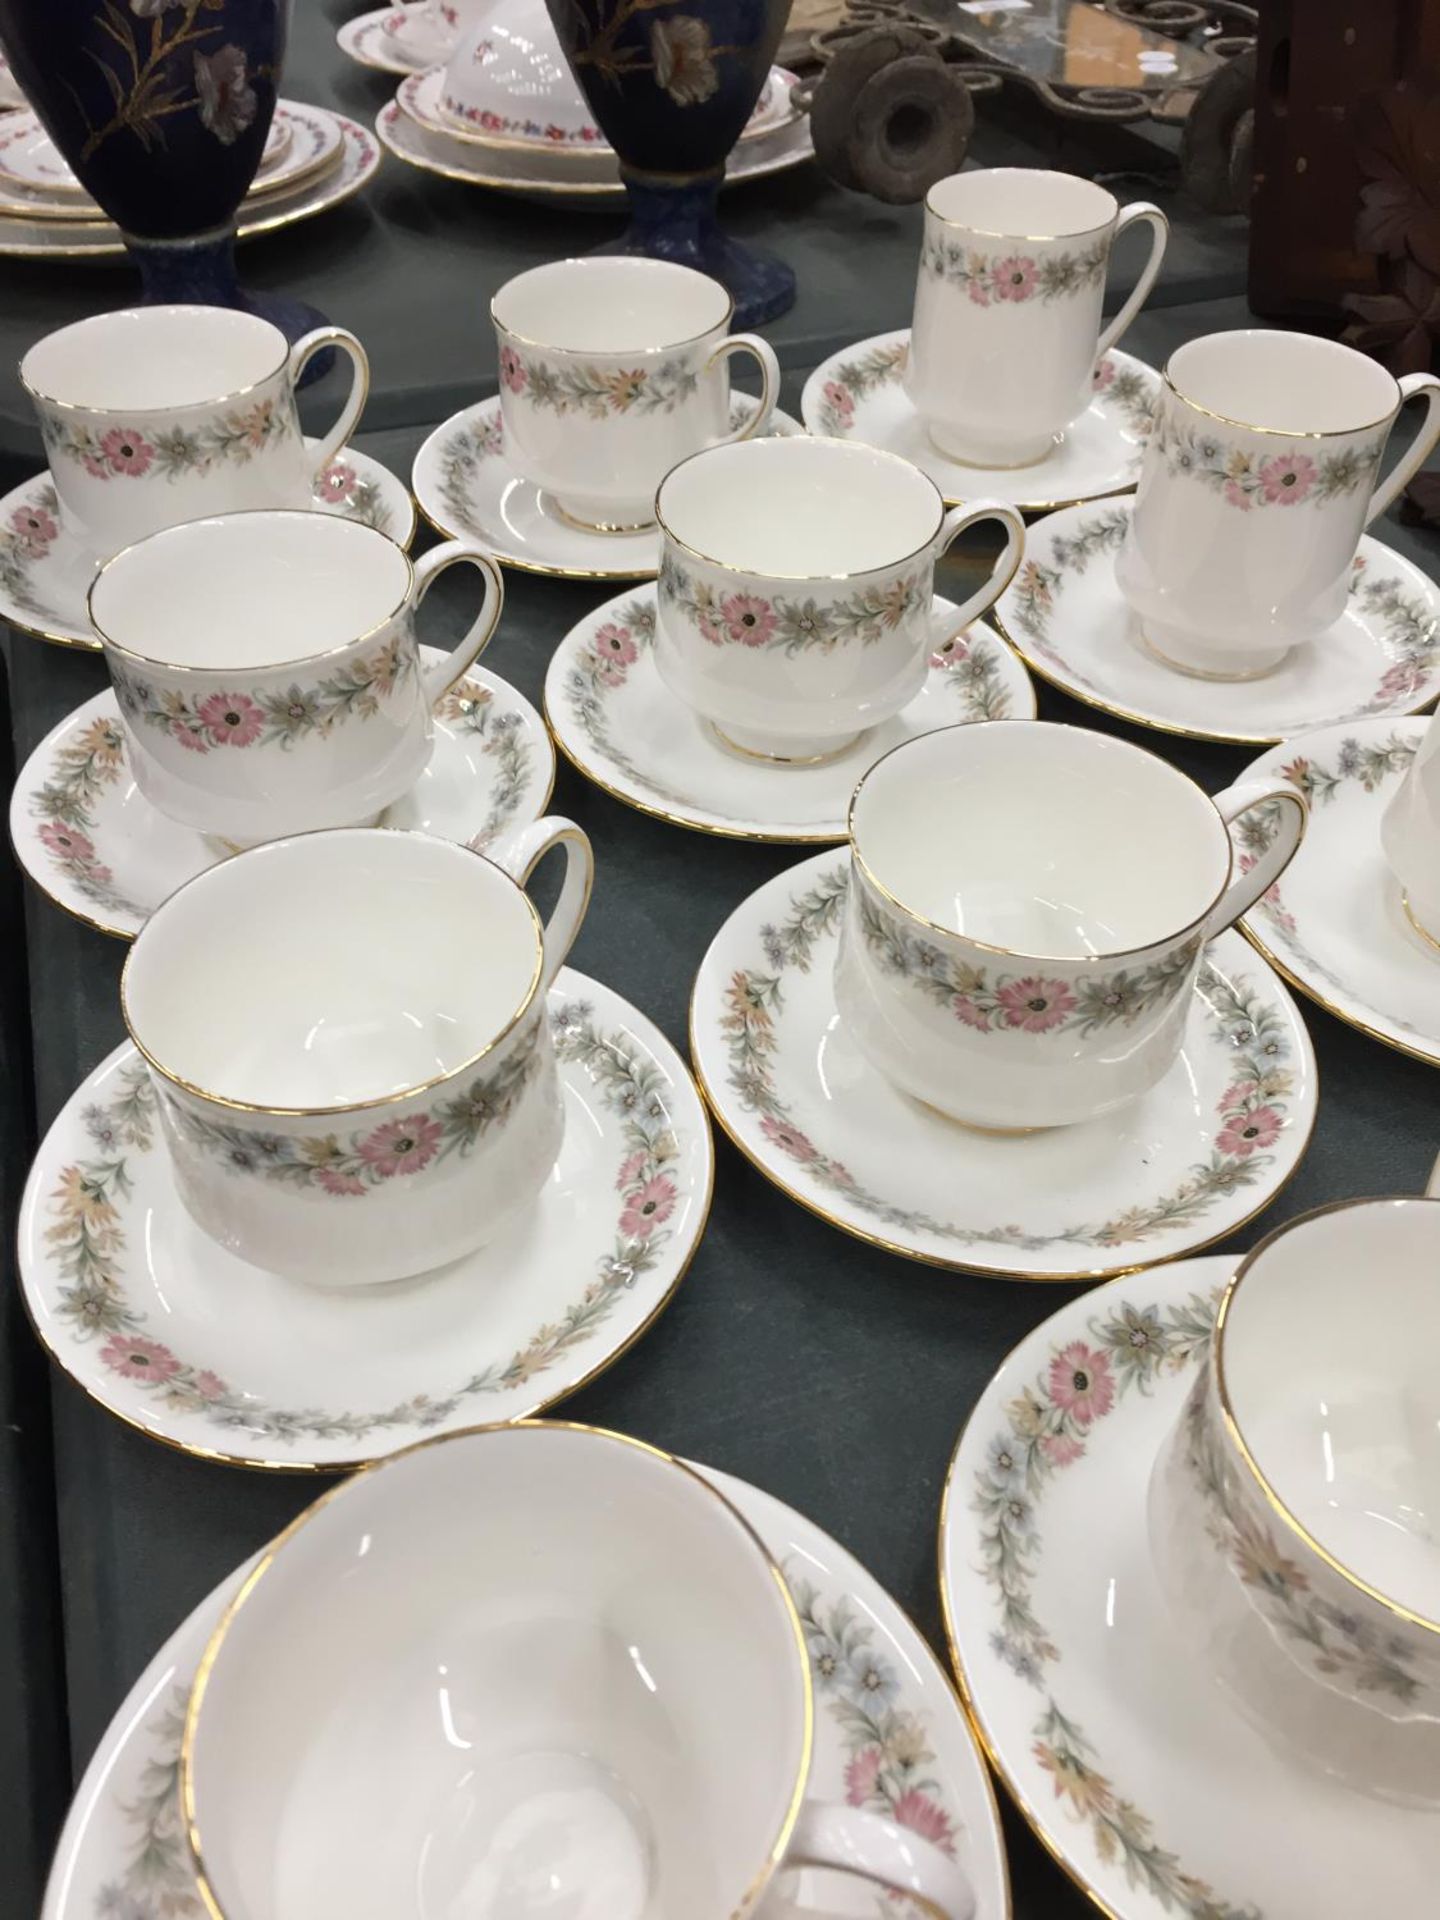 A LARGE QUANTITY OF ROYAL ALBERT 'BELINDA' CUPS AND SAUCERS - Image 3 of 3